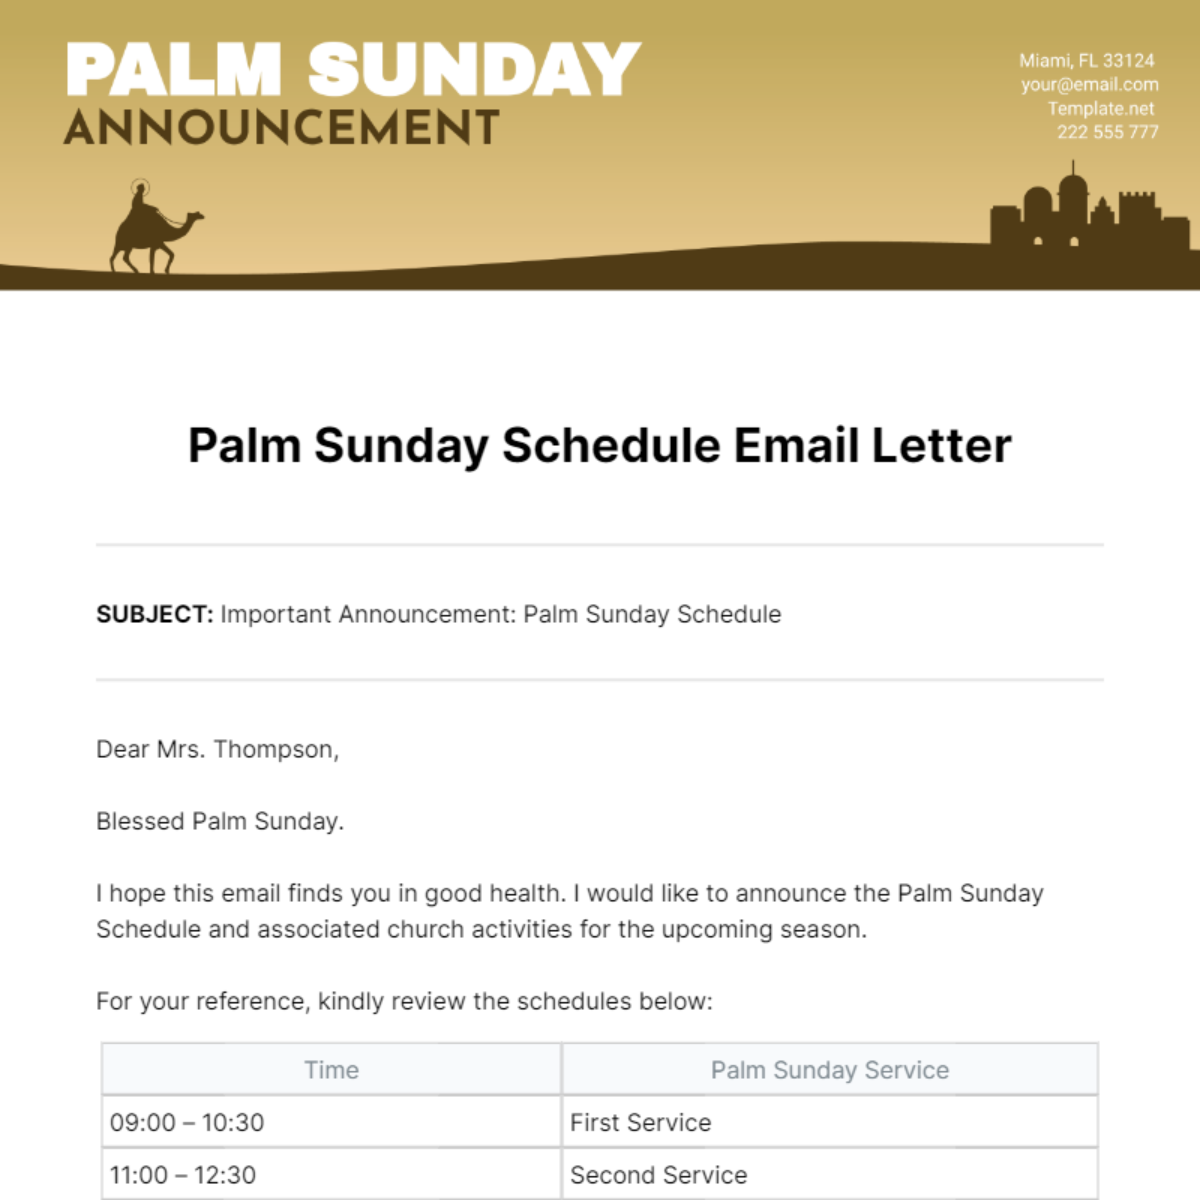 Important Announcement: Palm Sunday Schedule Email Letter Template